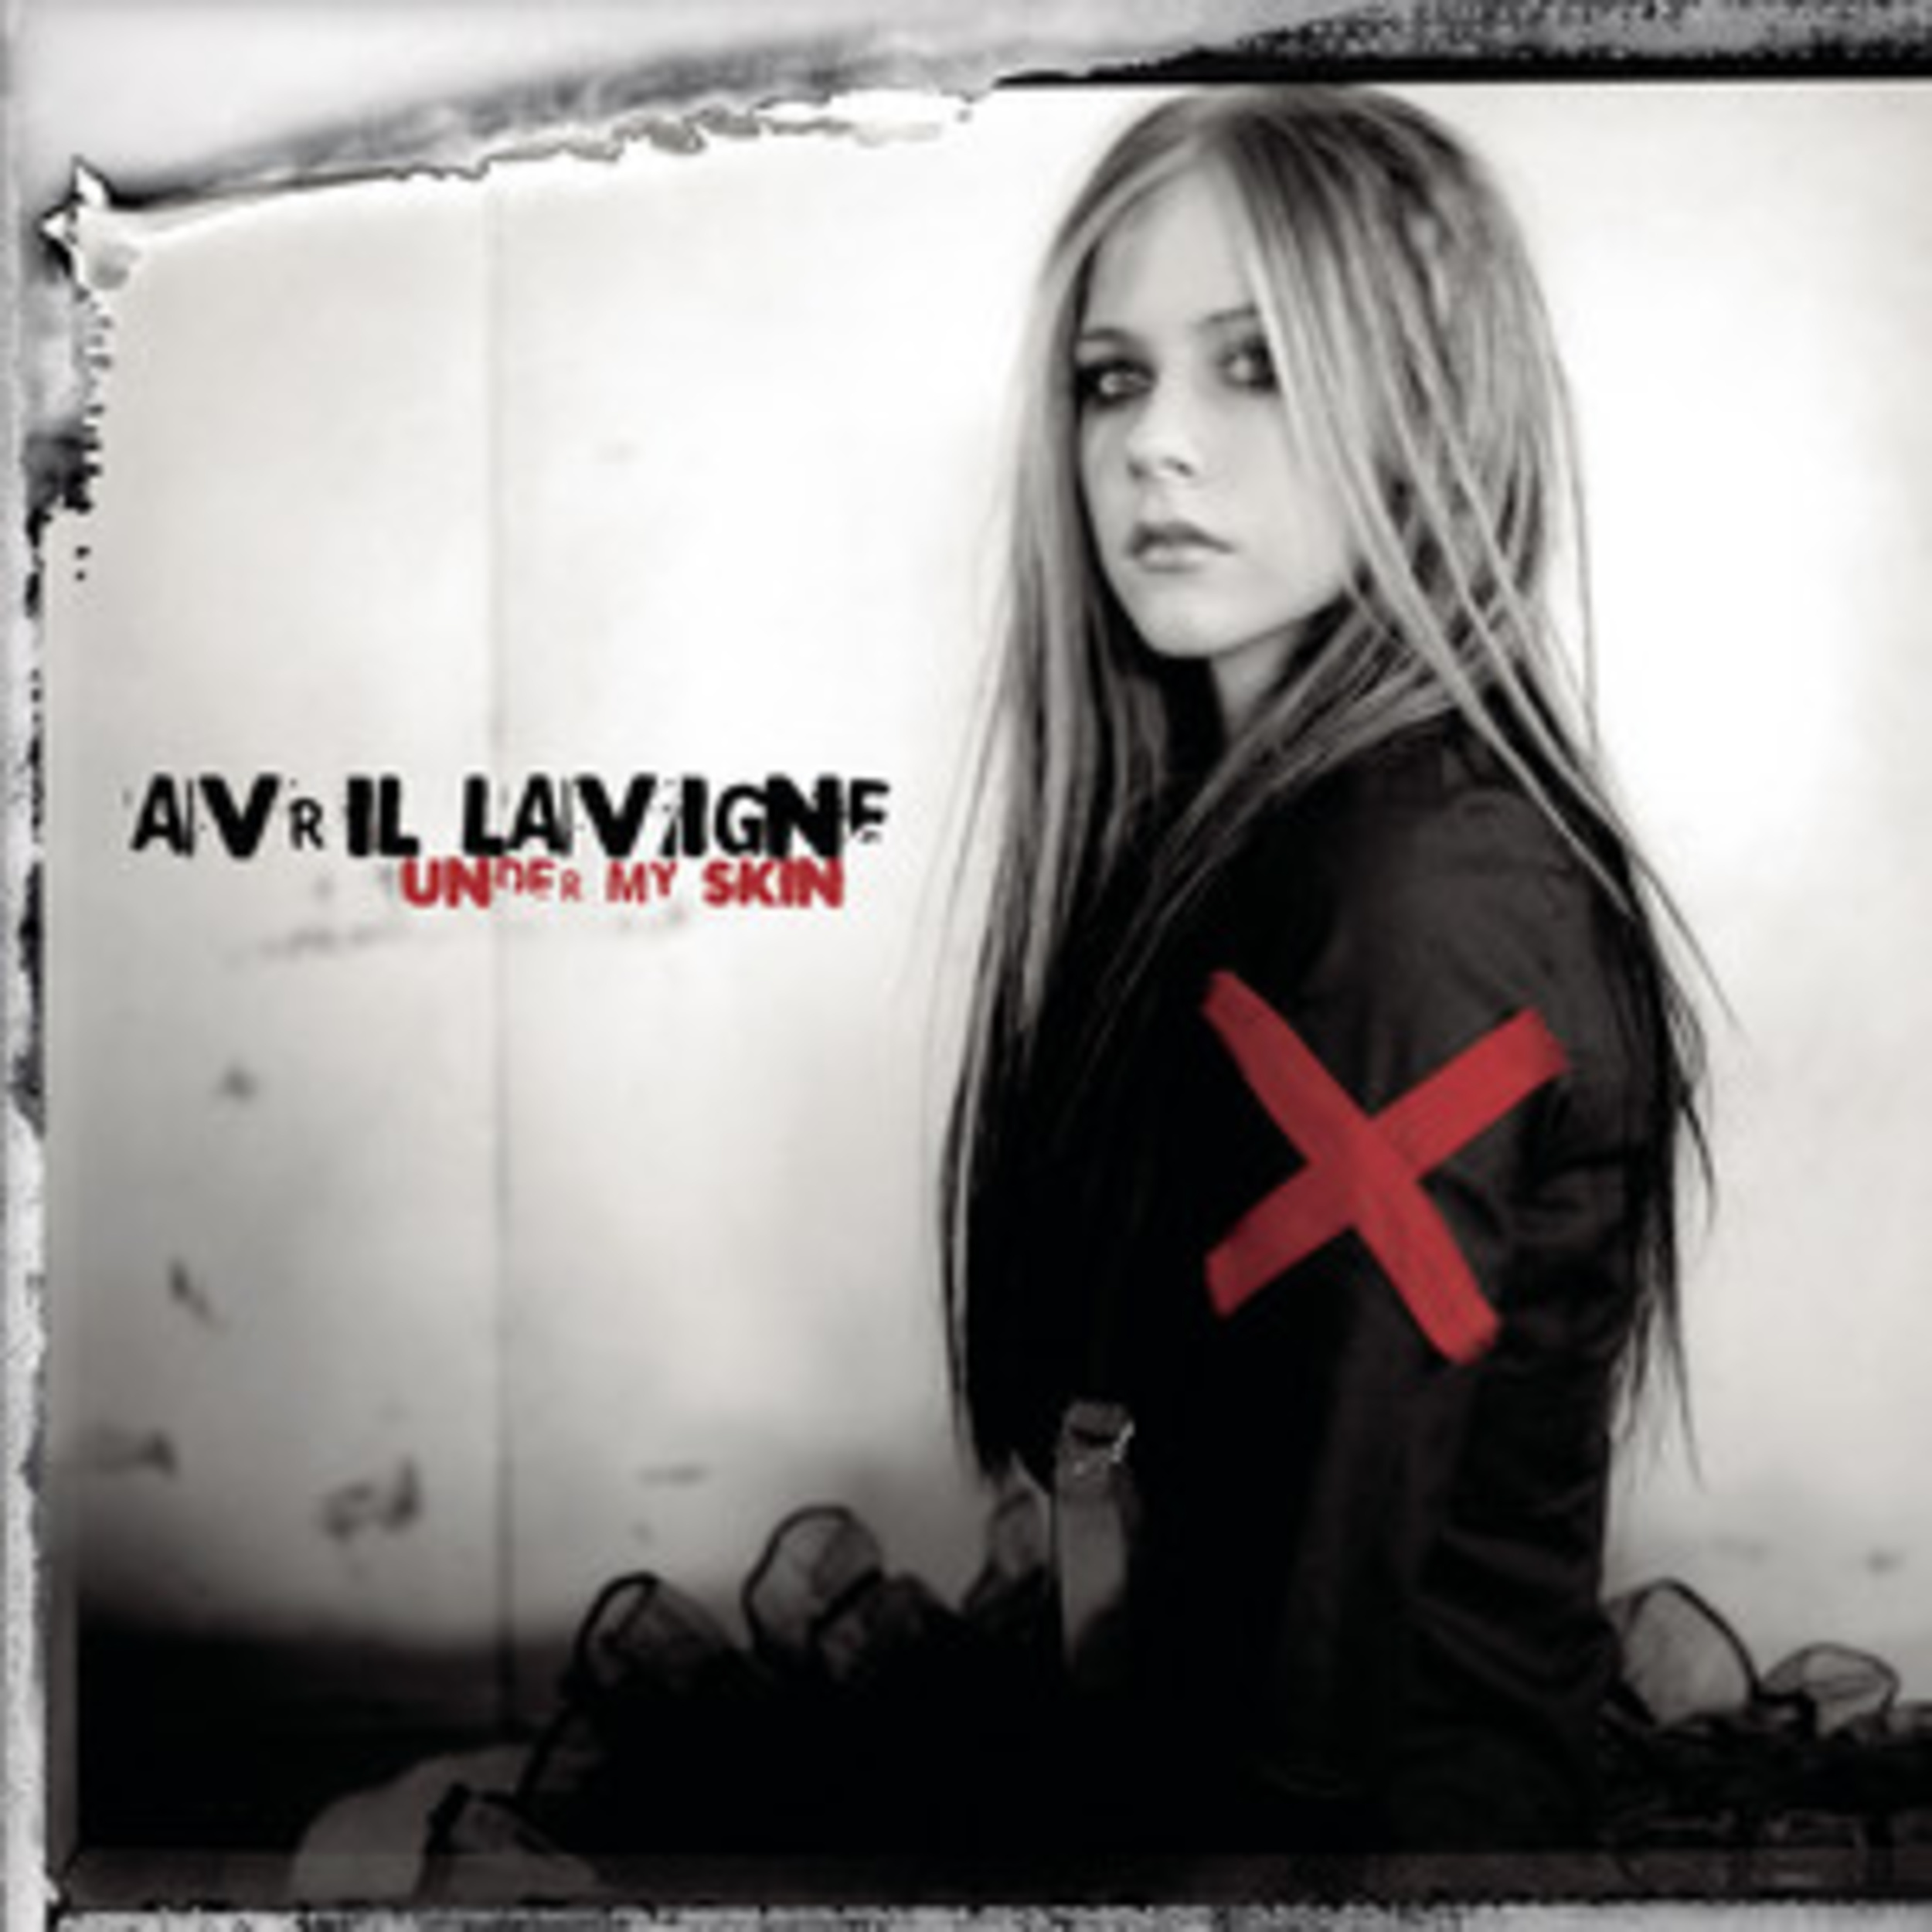 <p>Just a year after releasing her debut album, Avril Lavigne released her sophomore album, <em>Under My Skin.</em> Lavigne blended elements of her alternative, grunge, and nu-metal sound, and it was evident on her tracks like "Don't Tell Me," "Nobody's Home," and <a href="https://www.youtube.com/watch?v=0-zDFLbWK1Q">"My Happy Ending."</a> It's no wonder that Lavigne was a fan favorite on shows like MTV's <em>Total Request Live.</em></p><p><a href='https://www.msn.com/en-us/community/channel/vid-cj9pqbr0vn9in2b6ddcd8sfgpfq6x6utp44fssrv6mc2gtybw0us'>Follow us on MSN to see more of our exclusive entertainment content.</a></p>